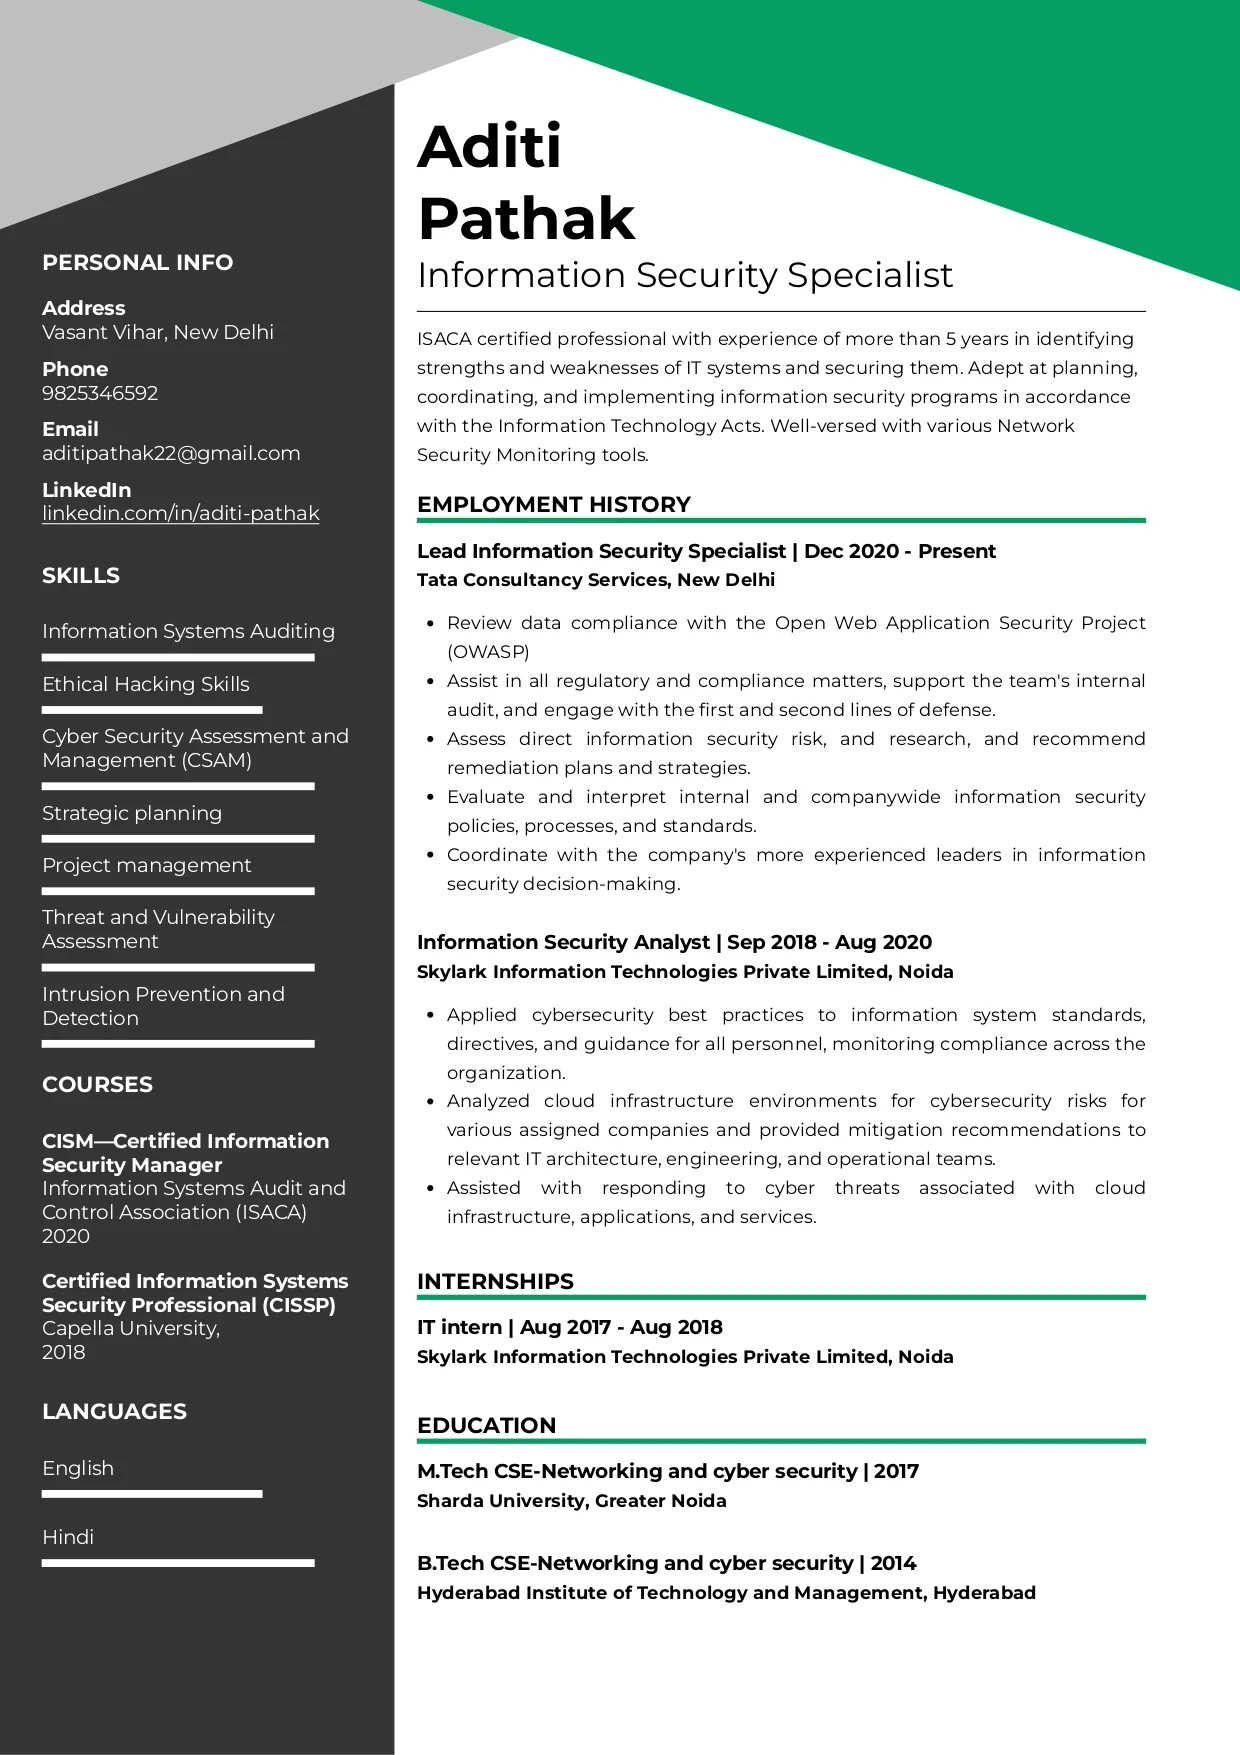 Sample Resume of Information Security Specialist | Free Resume Templates & Samples on Resumod.co